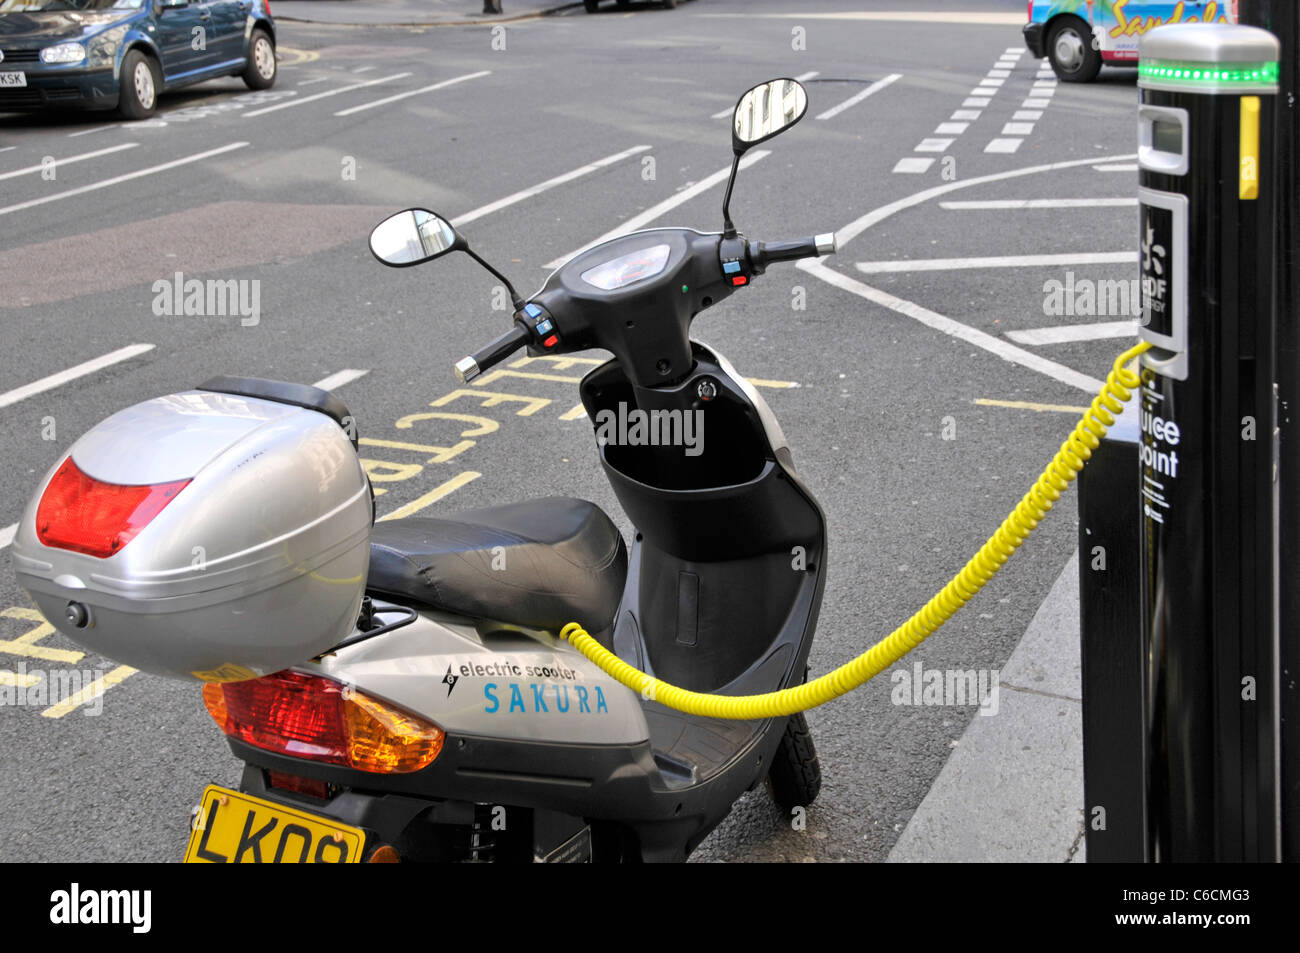 Electric car charging station & recharging parking bay occupied by scooter battery connected to electricity pillar yellow cable street scene London UK Stock Photo